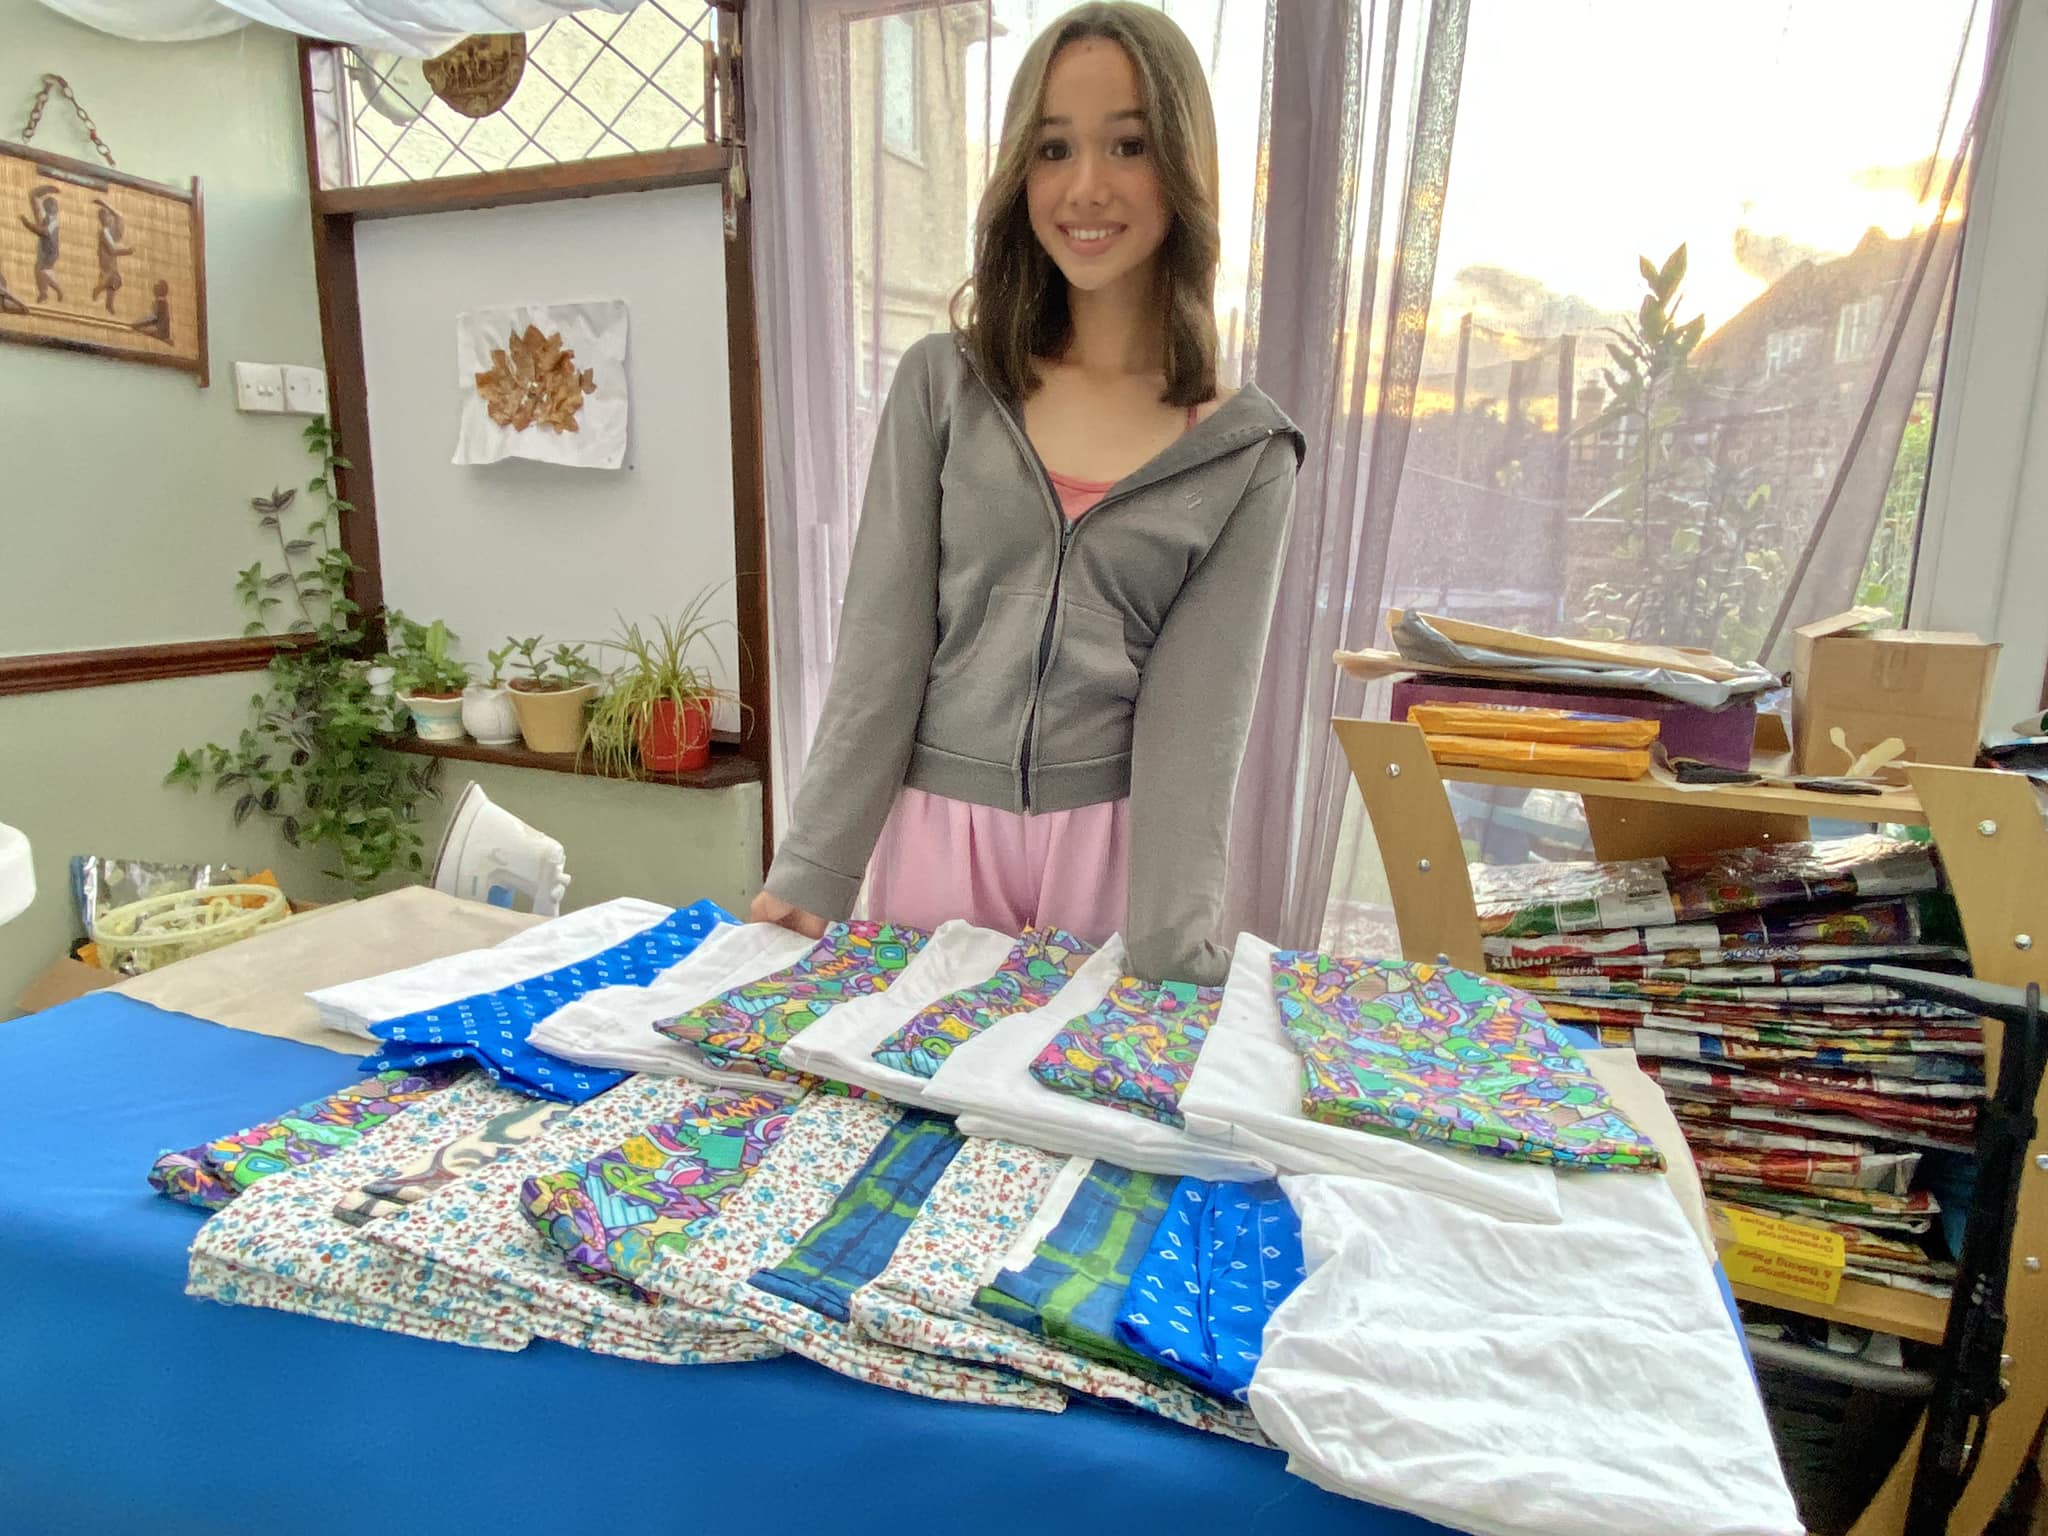 Alyssa smiling with a table full of fabric.